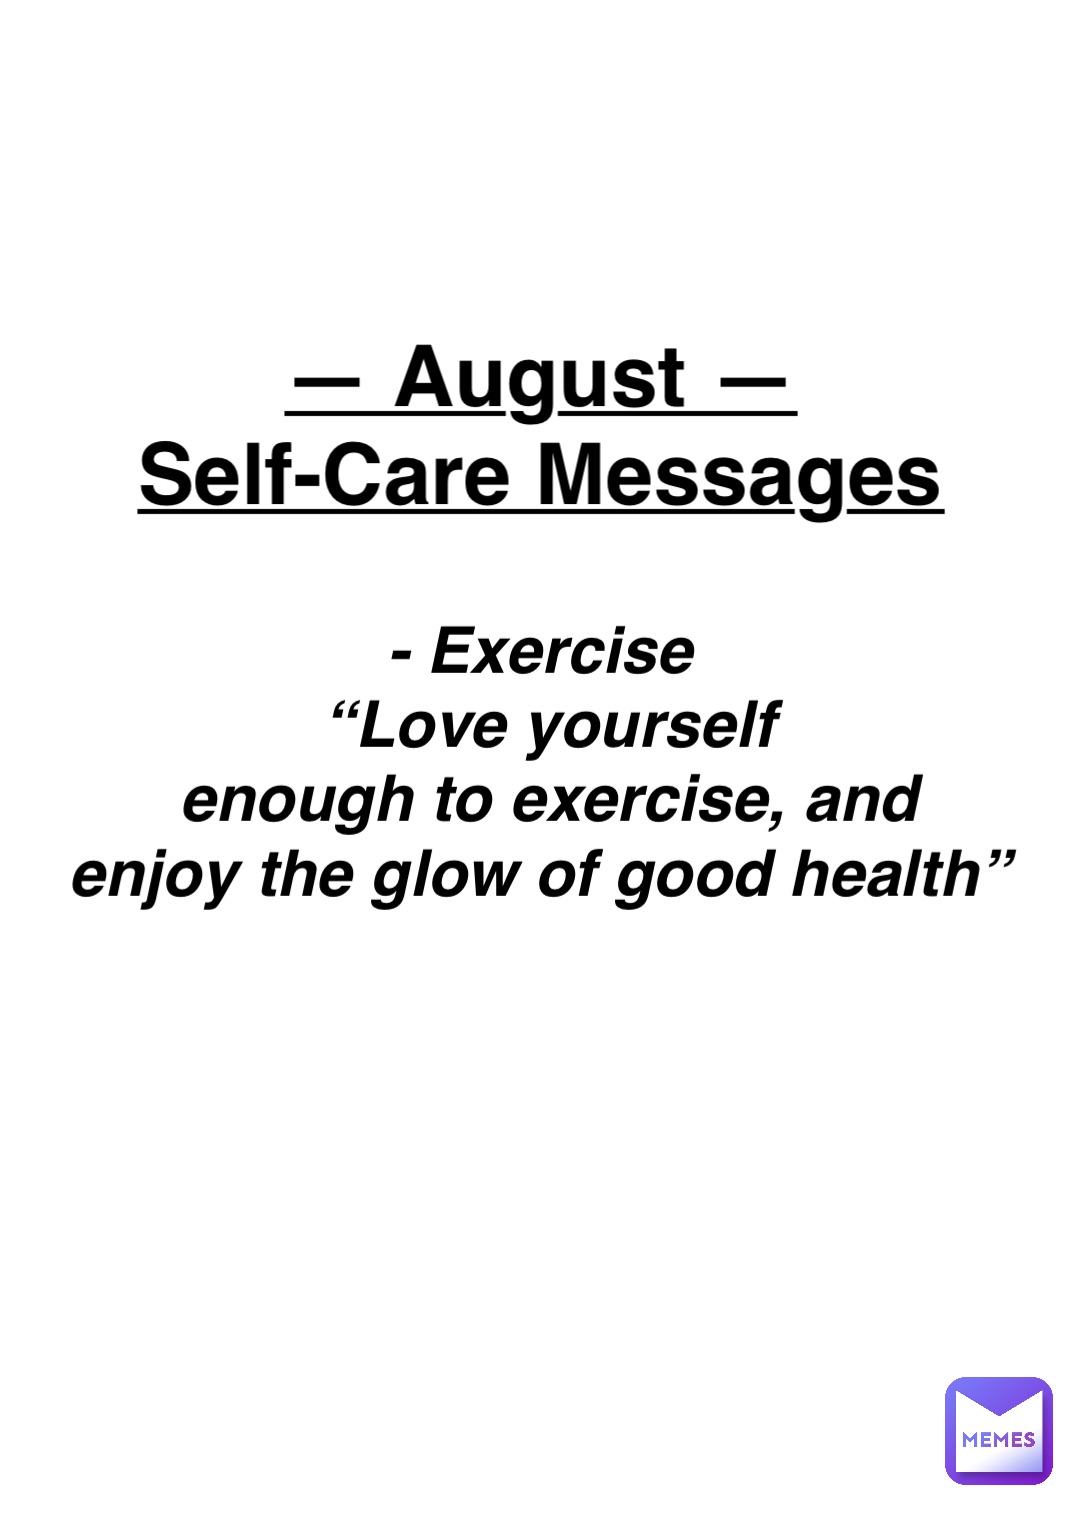 Double tap to edit — August —
Self-Care Messages - Exercise
“Love yourself 
enough to exercise, and 
enjoy the glow of good health”